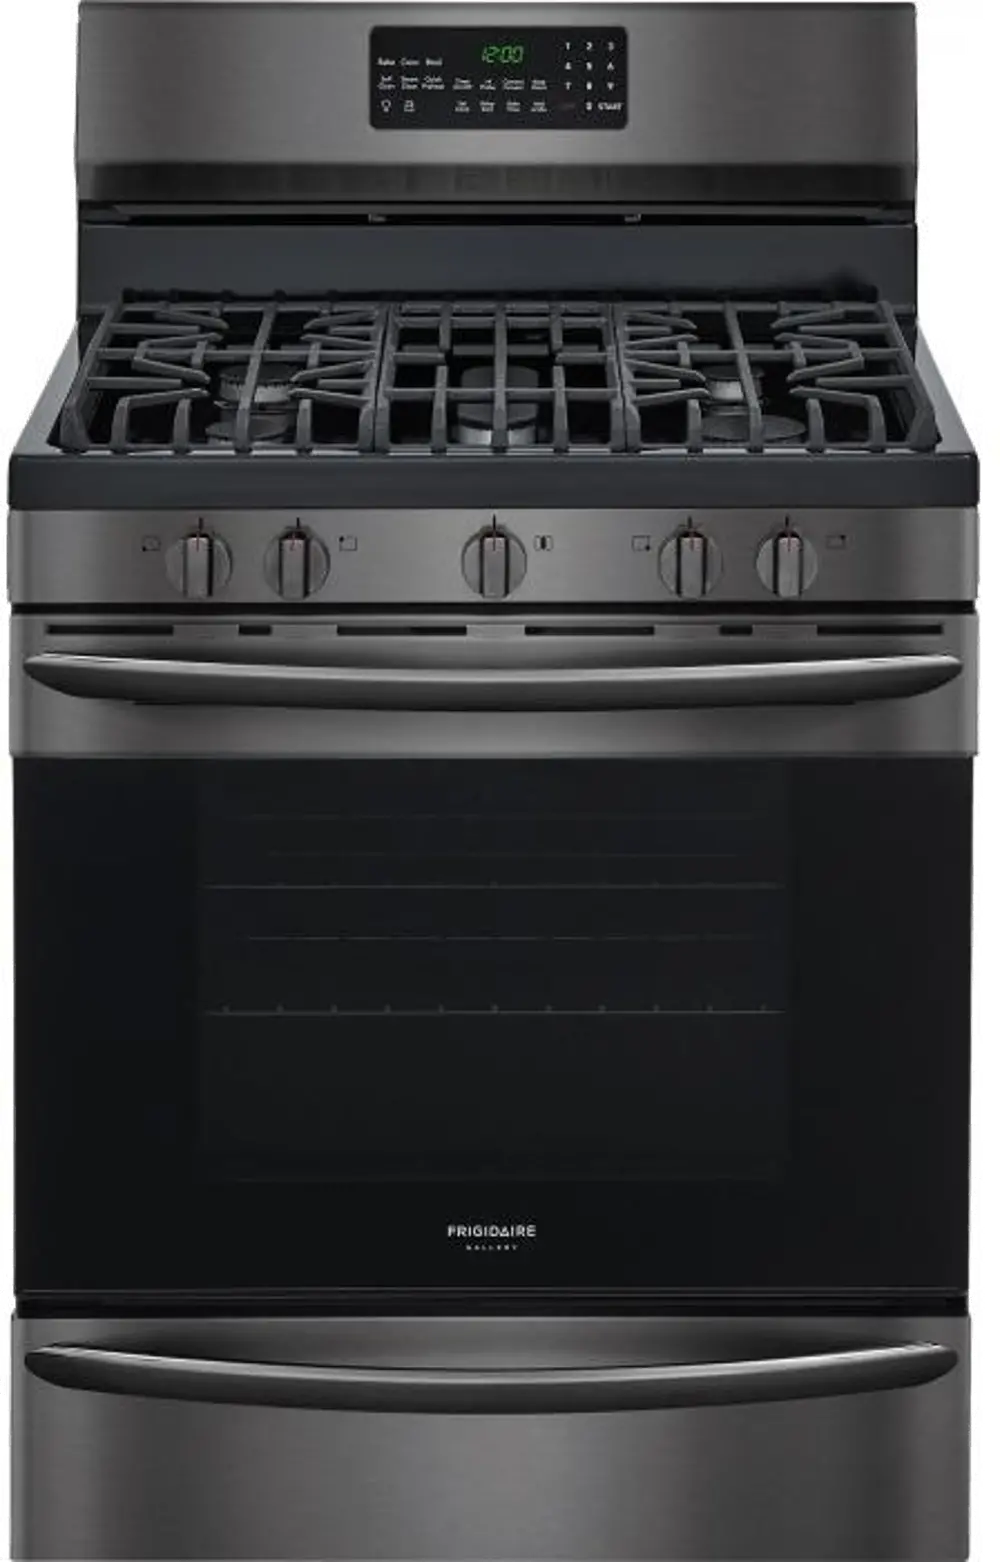 FGGF3059TD Frigidaire Gas Range with Effortless Temperature Probe with Auto Keep Warm - 5.0 cu. ft. Black Stainless Steel-1